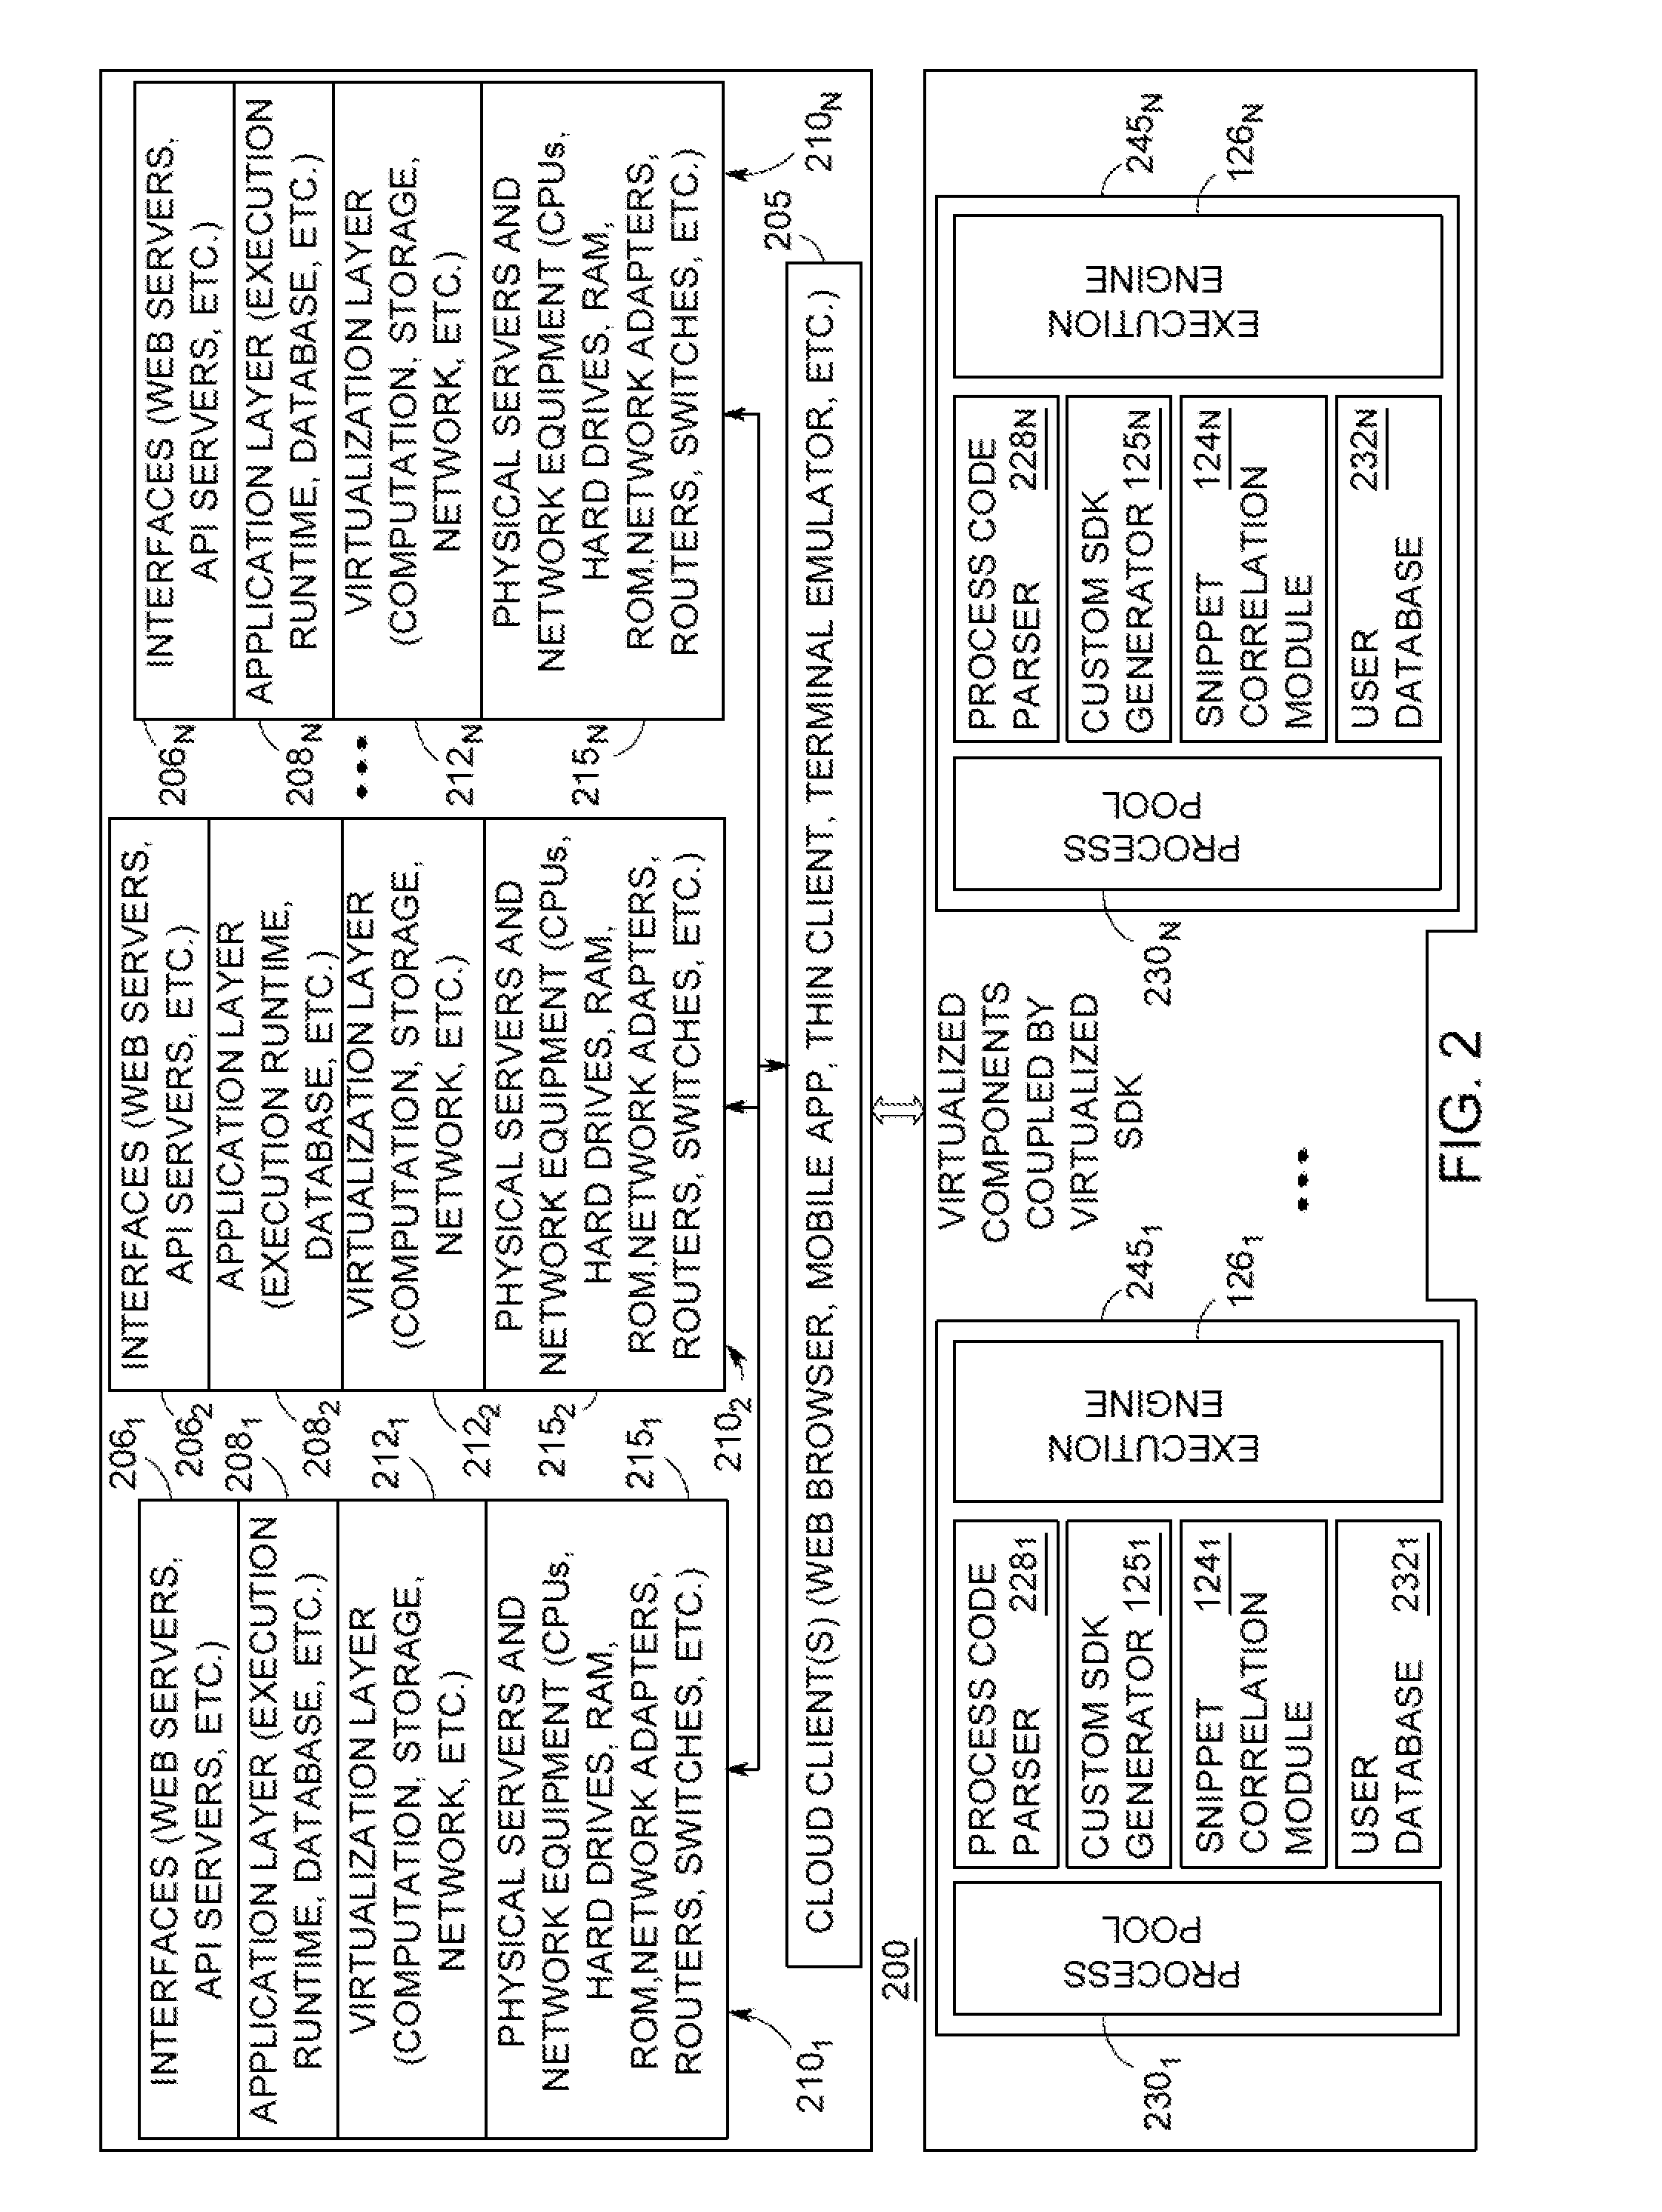 Method and apparatus for customized software development kit (SDK) generation